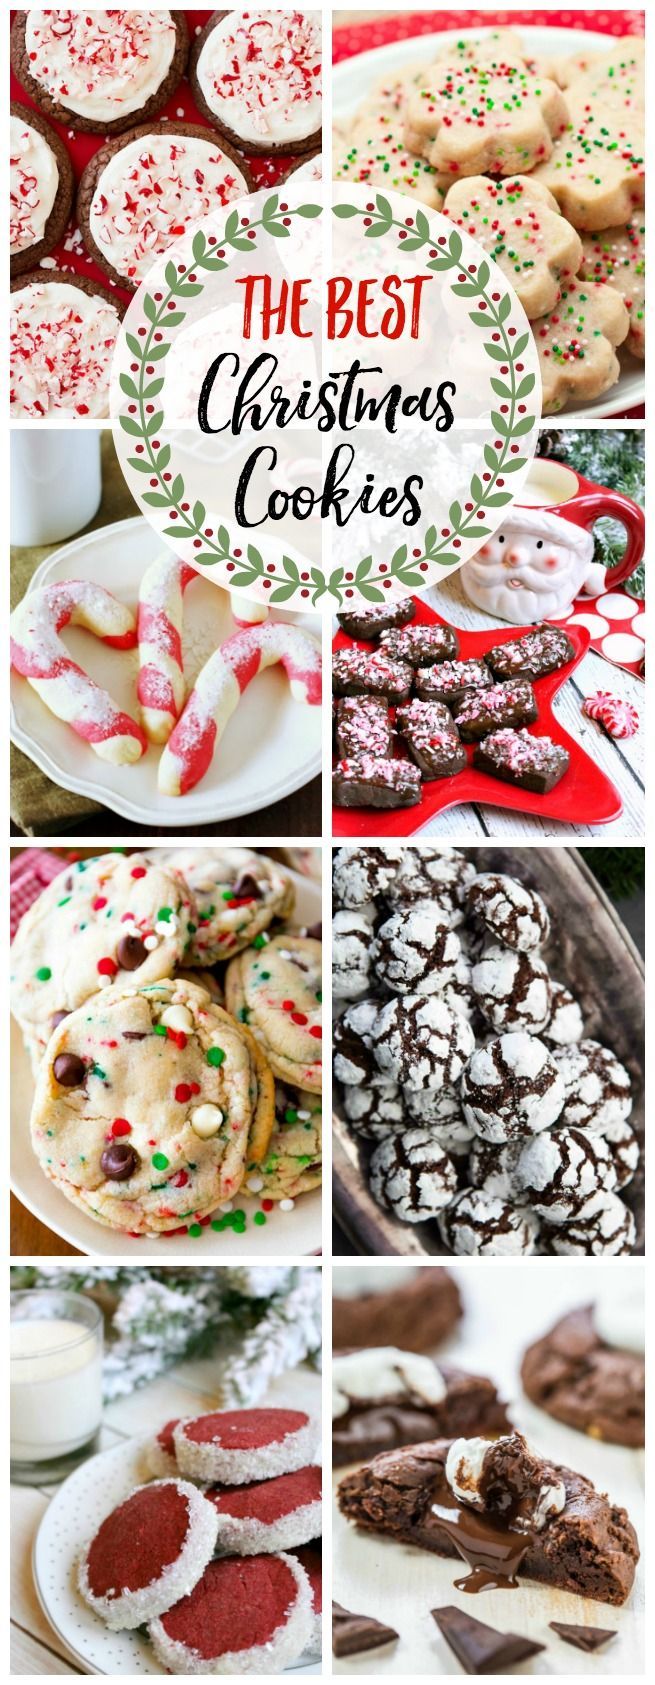 Try some of these delicious Christmas cookie recipes for your holiday baking. Perf